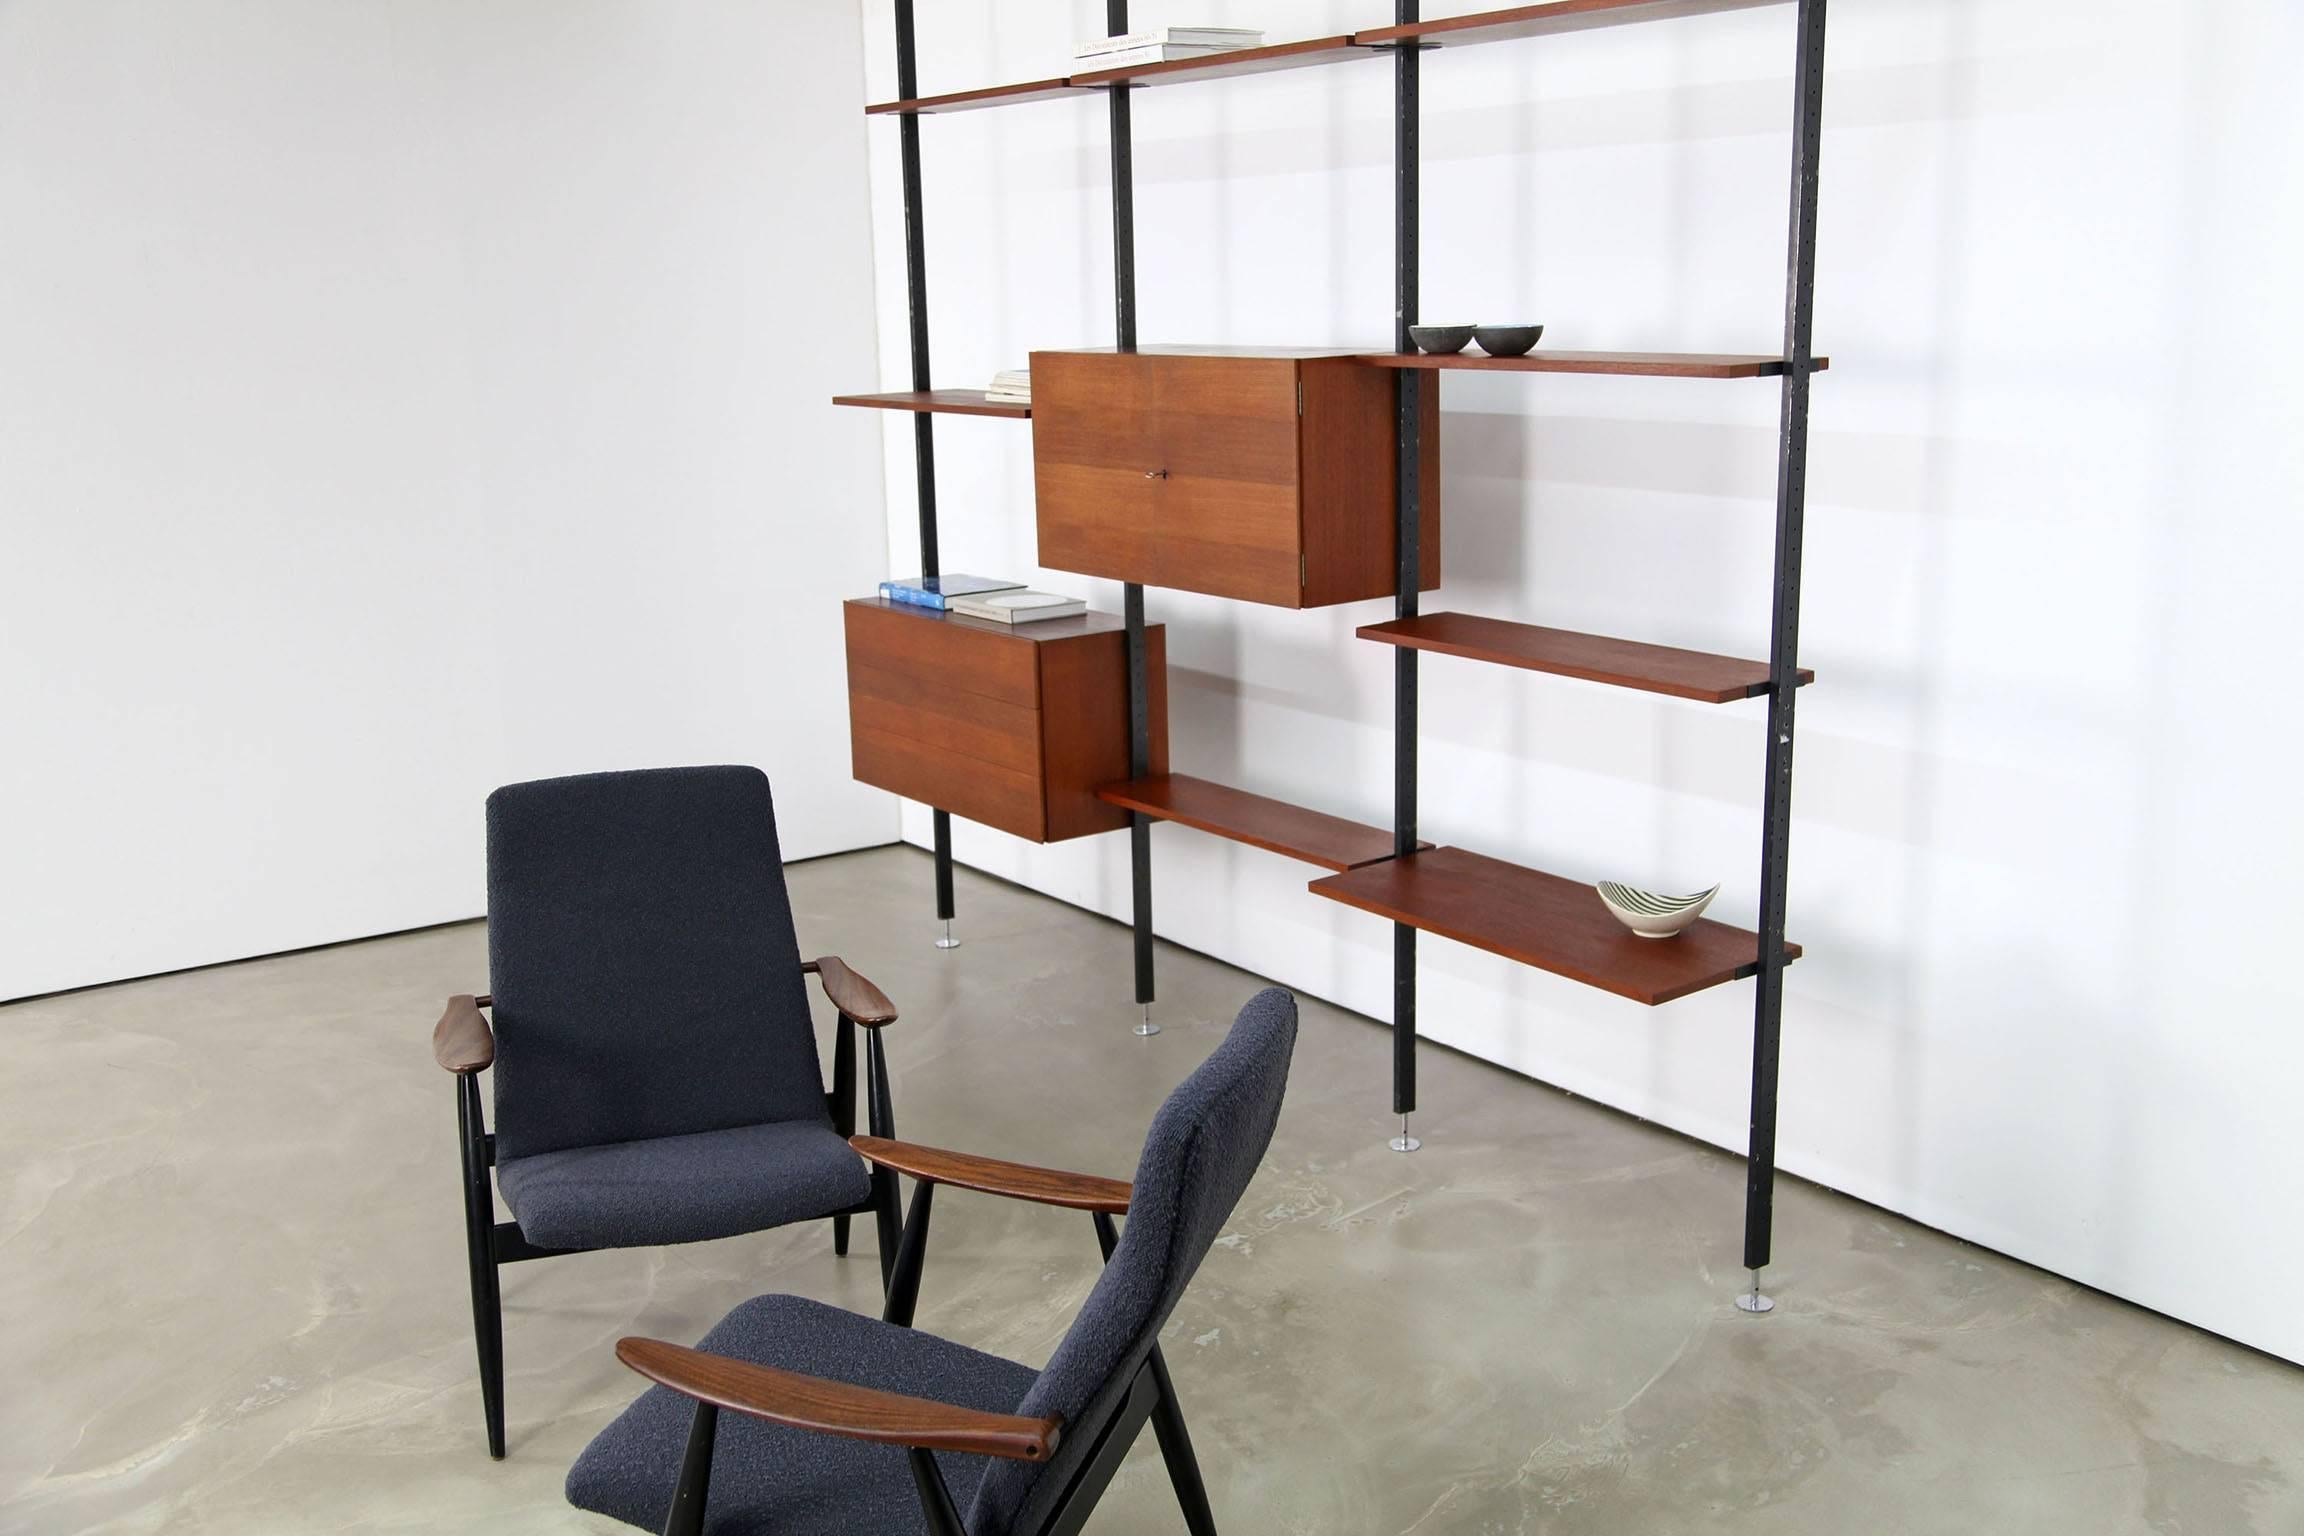 Freestanding wall-unit designed by Ulrich P. Wieser for Bofinger - Wohnbedarf AG, Switzerland in 1958. It comes with two teak veneered compartments and boards. The four black painted steel profiles are height adjustable and are fixed between floor